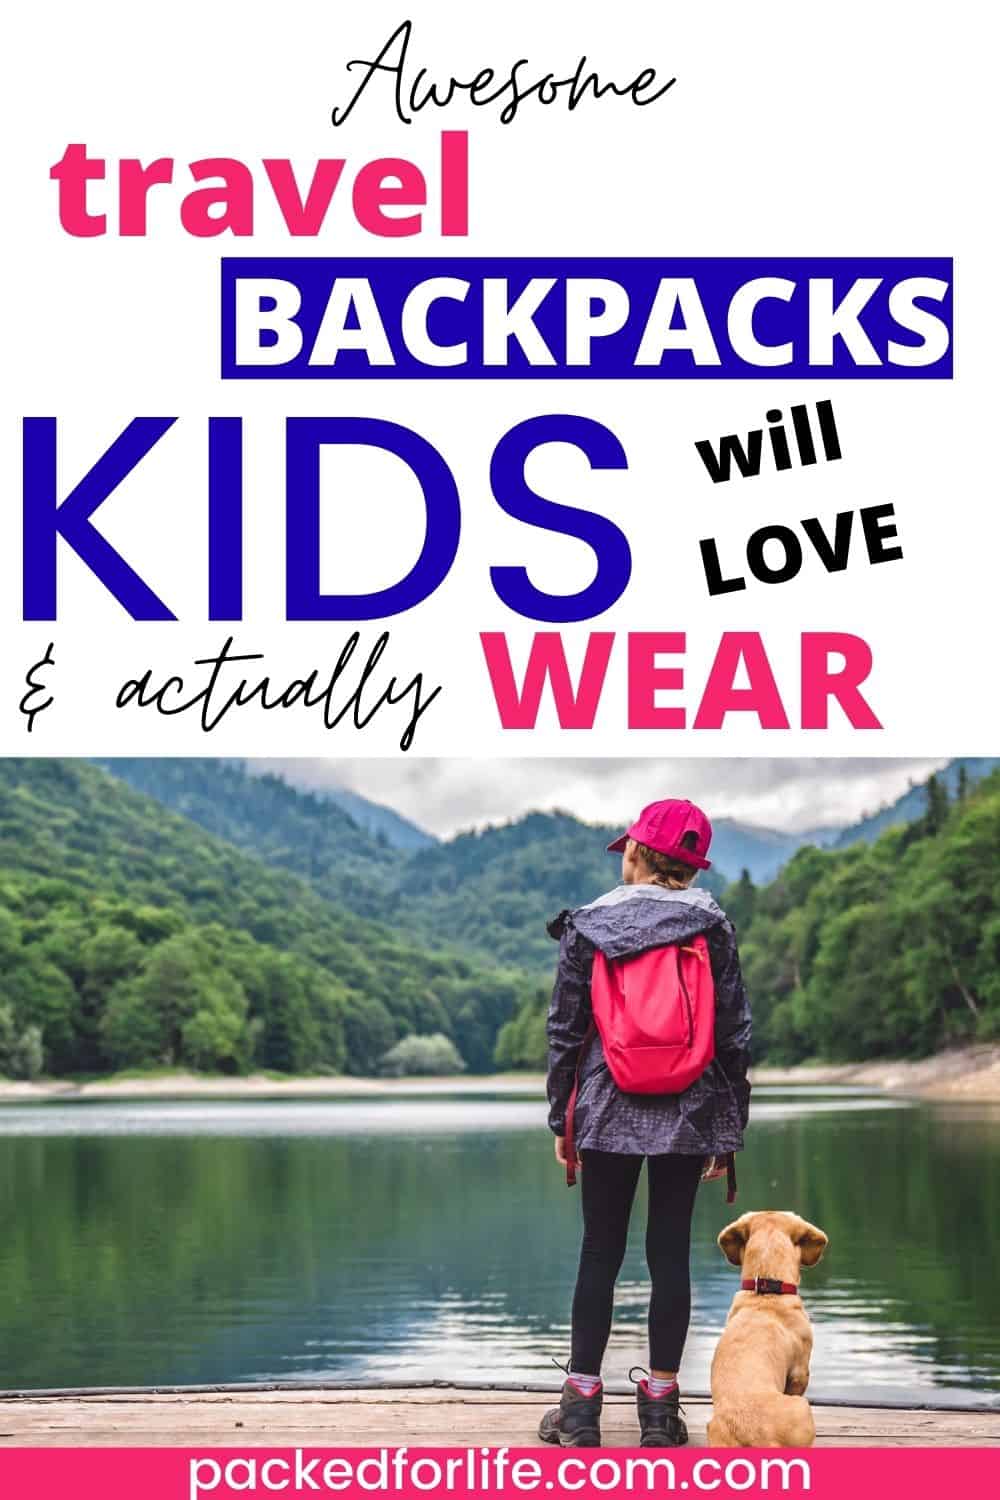 15 Best Travel Backpacks for Kids, Tweens And Toddlers (2022)